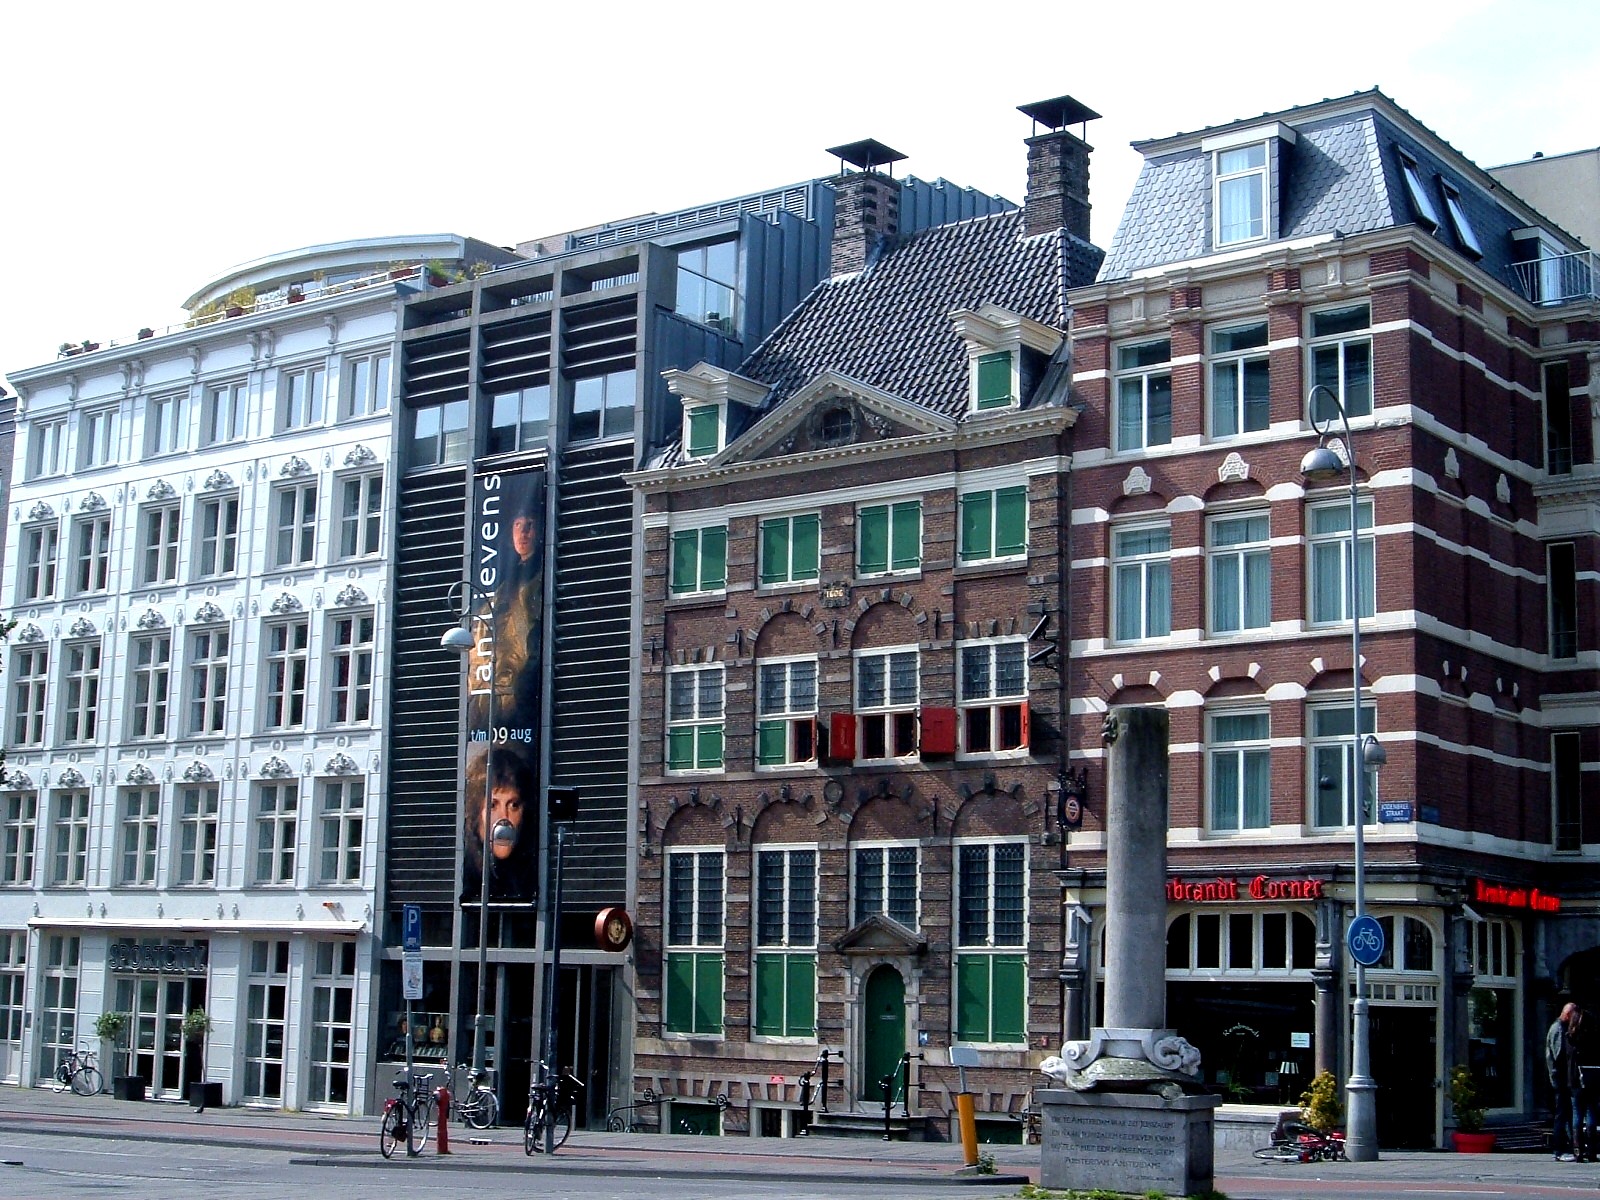 11 Best Things To Do in Amsterdam, Netherlands [with Suggested Tours]